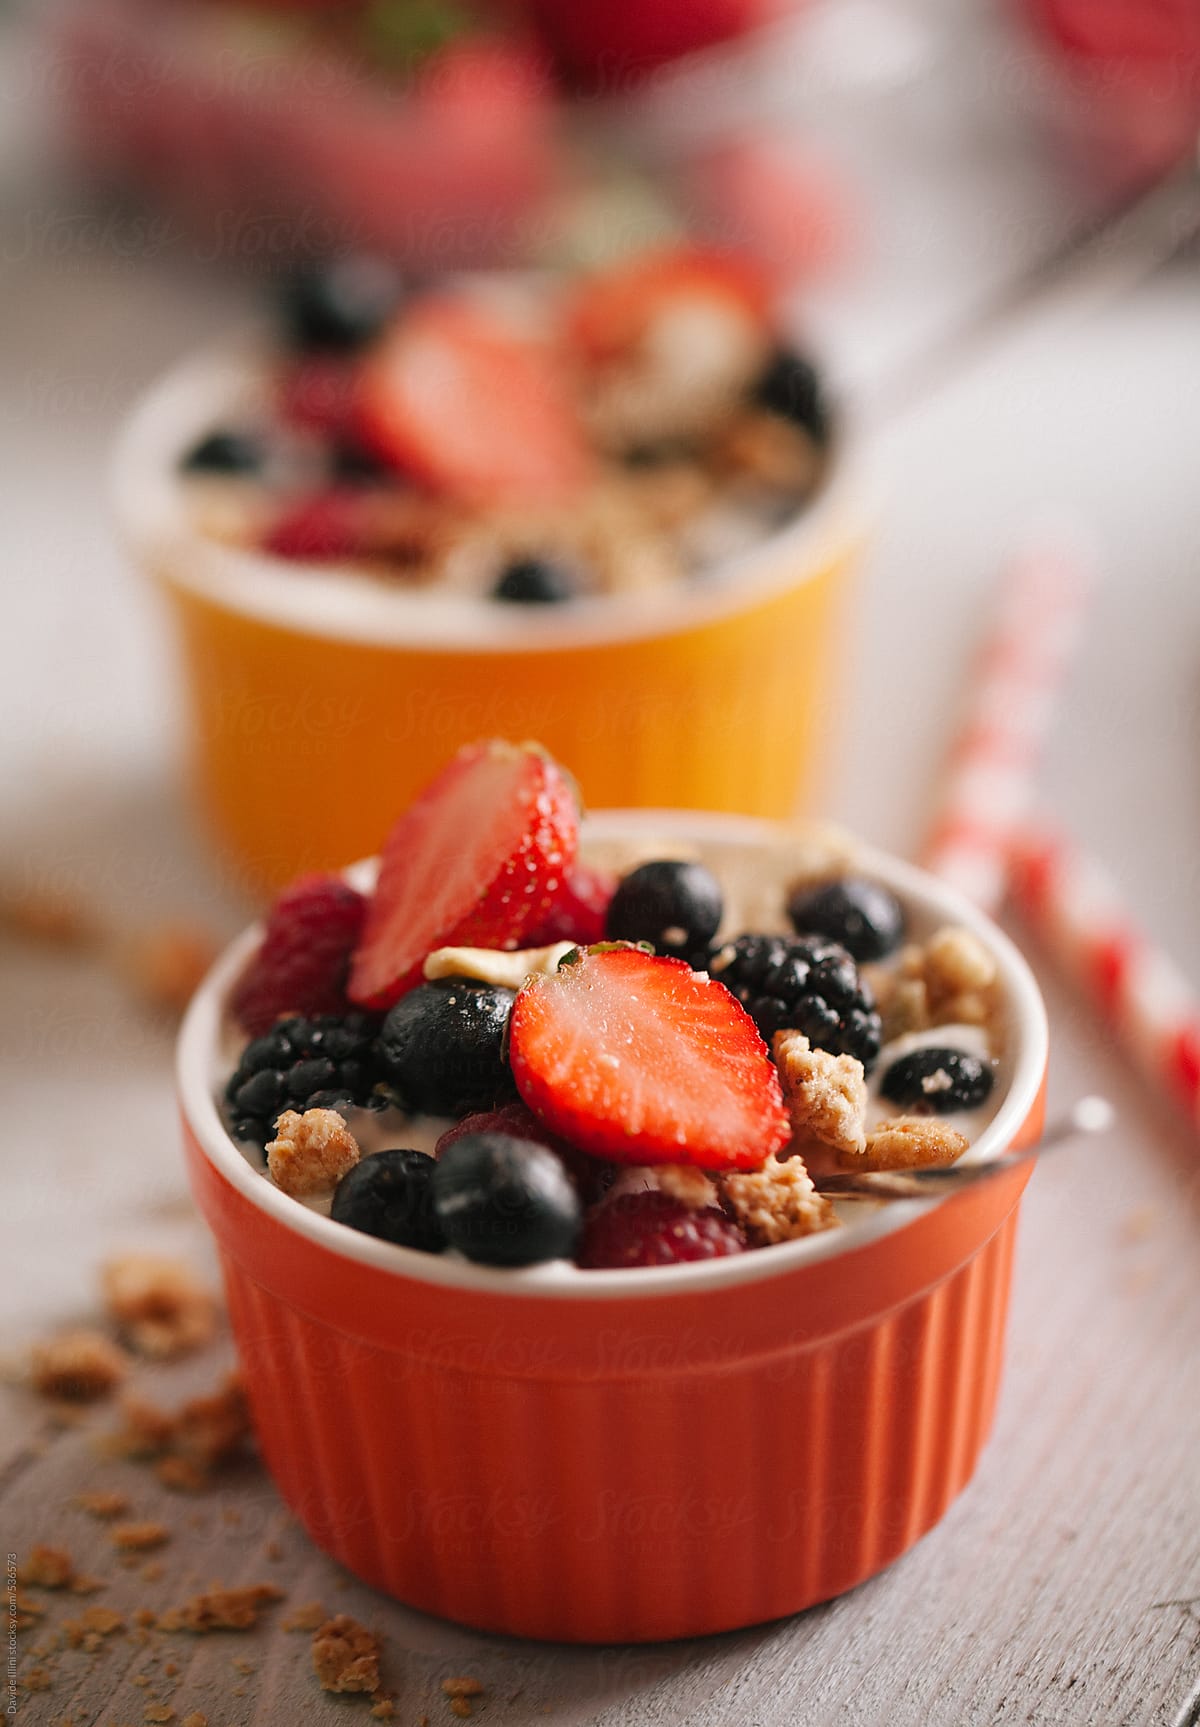 Yogurt with fresh fruit and cereals